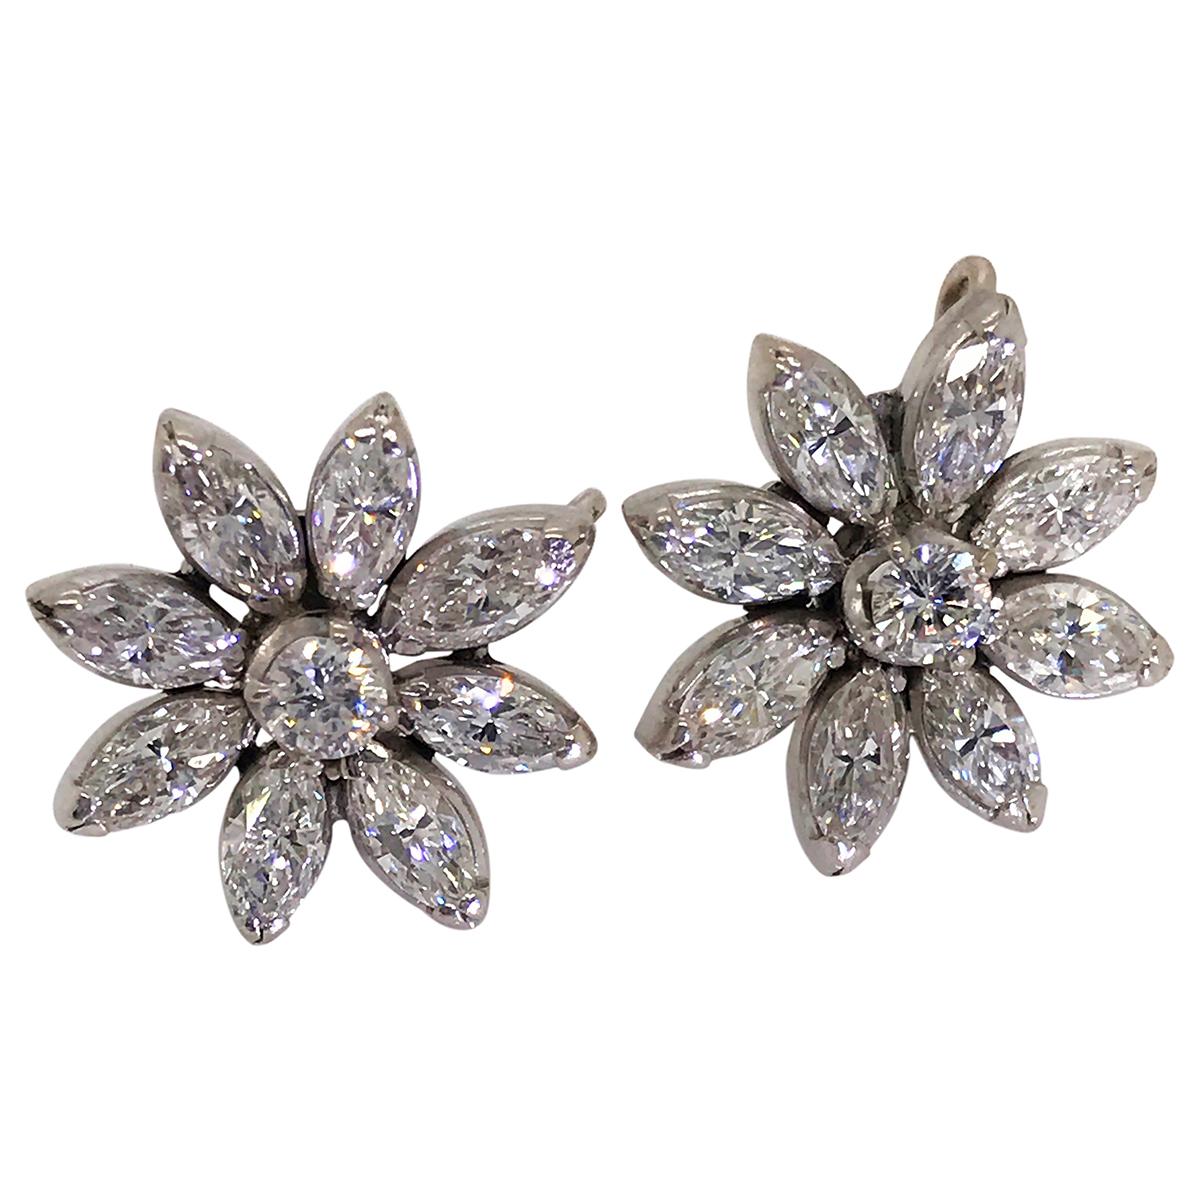 Pretty flower stud earrings each set with 8 marquise cut diamonds forming the flower petals with a central round cut diamond. The total diamond weight for both earrings is 2.10cts mounted in 14k white gold. The back of the earring has a small hook